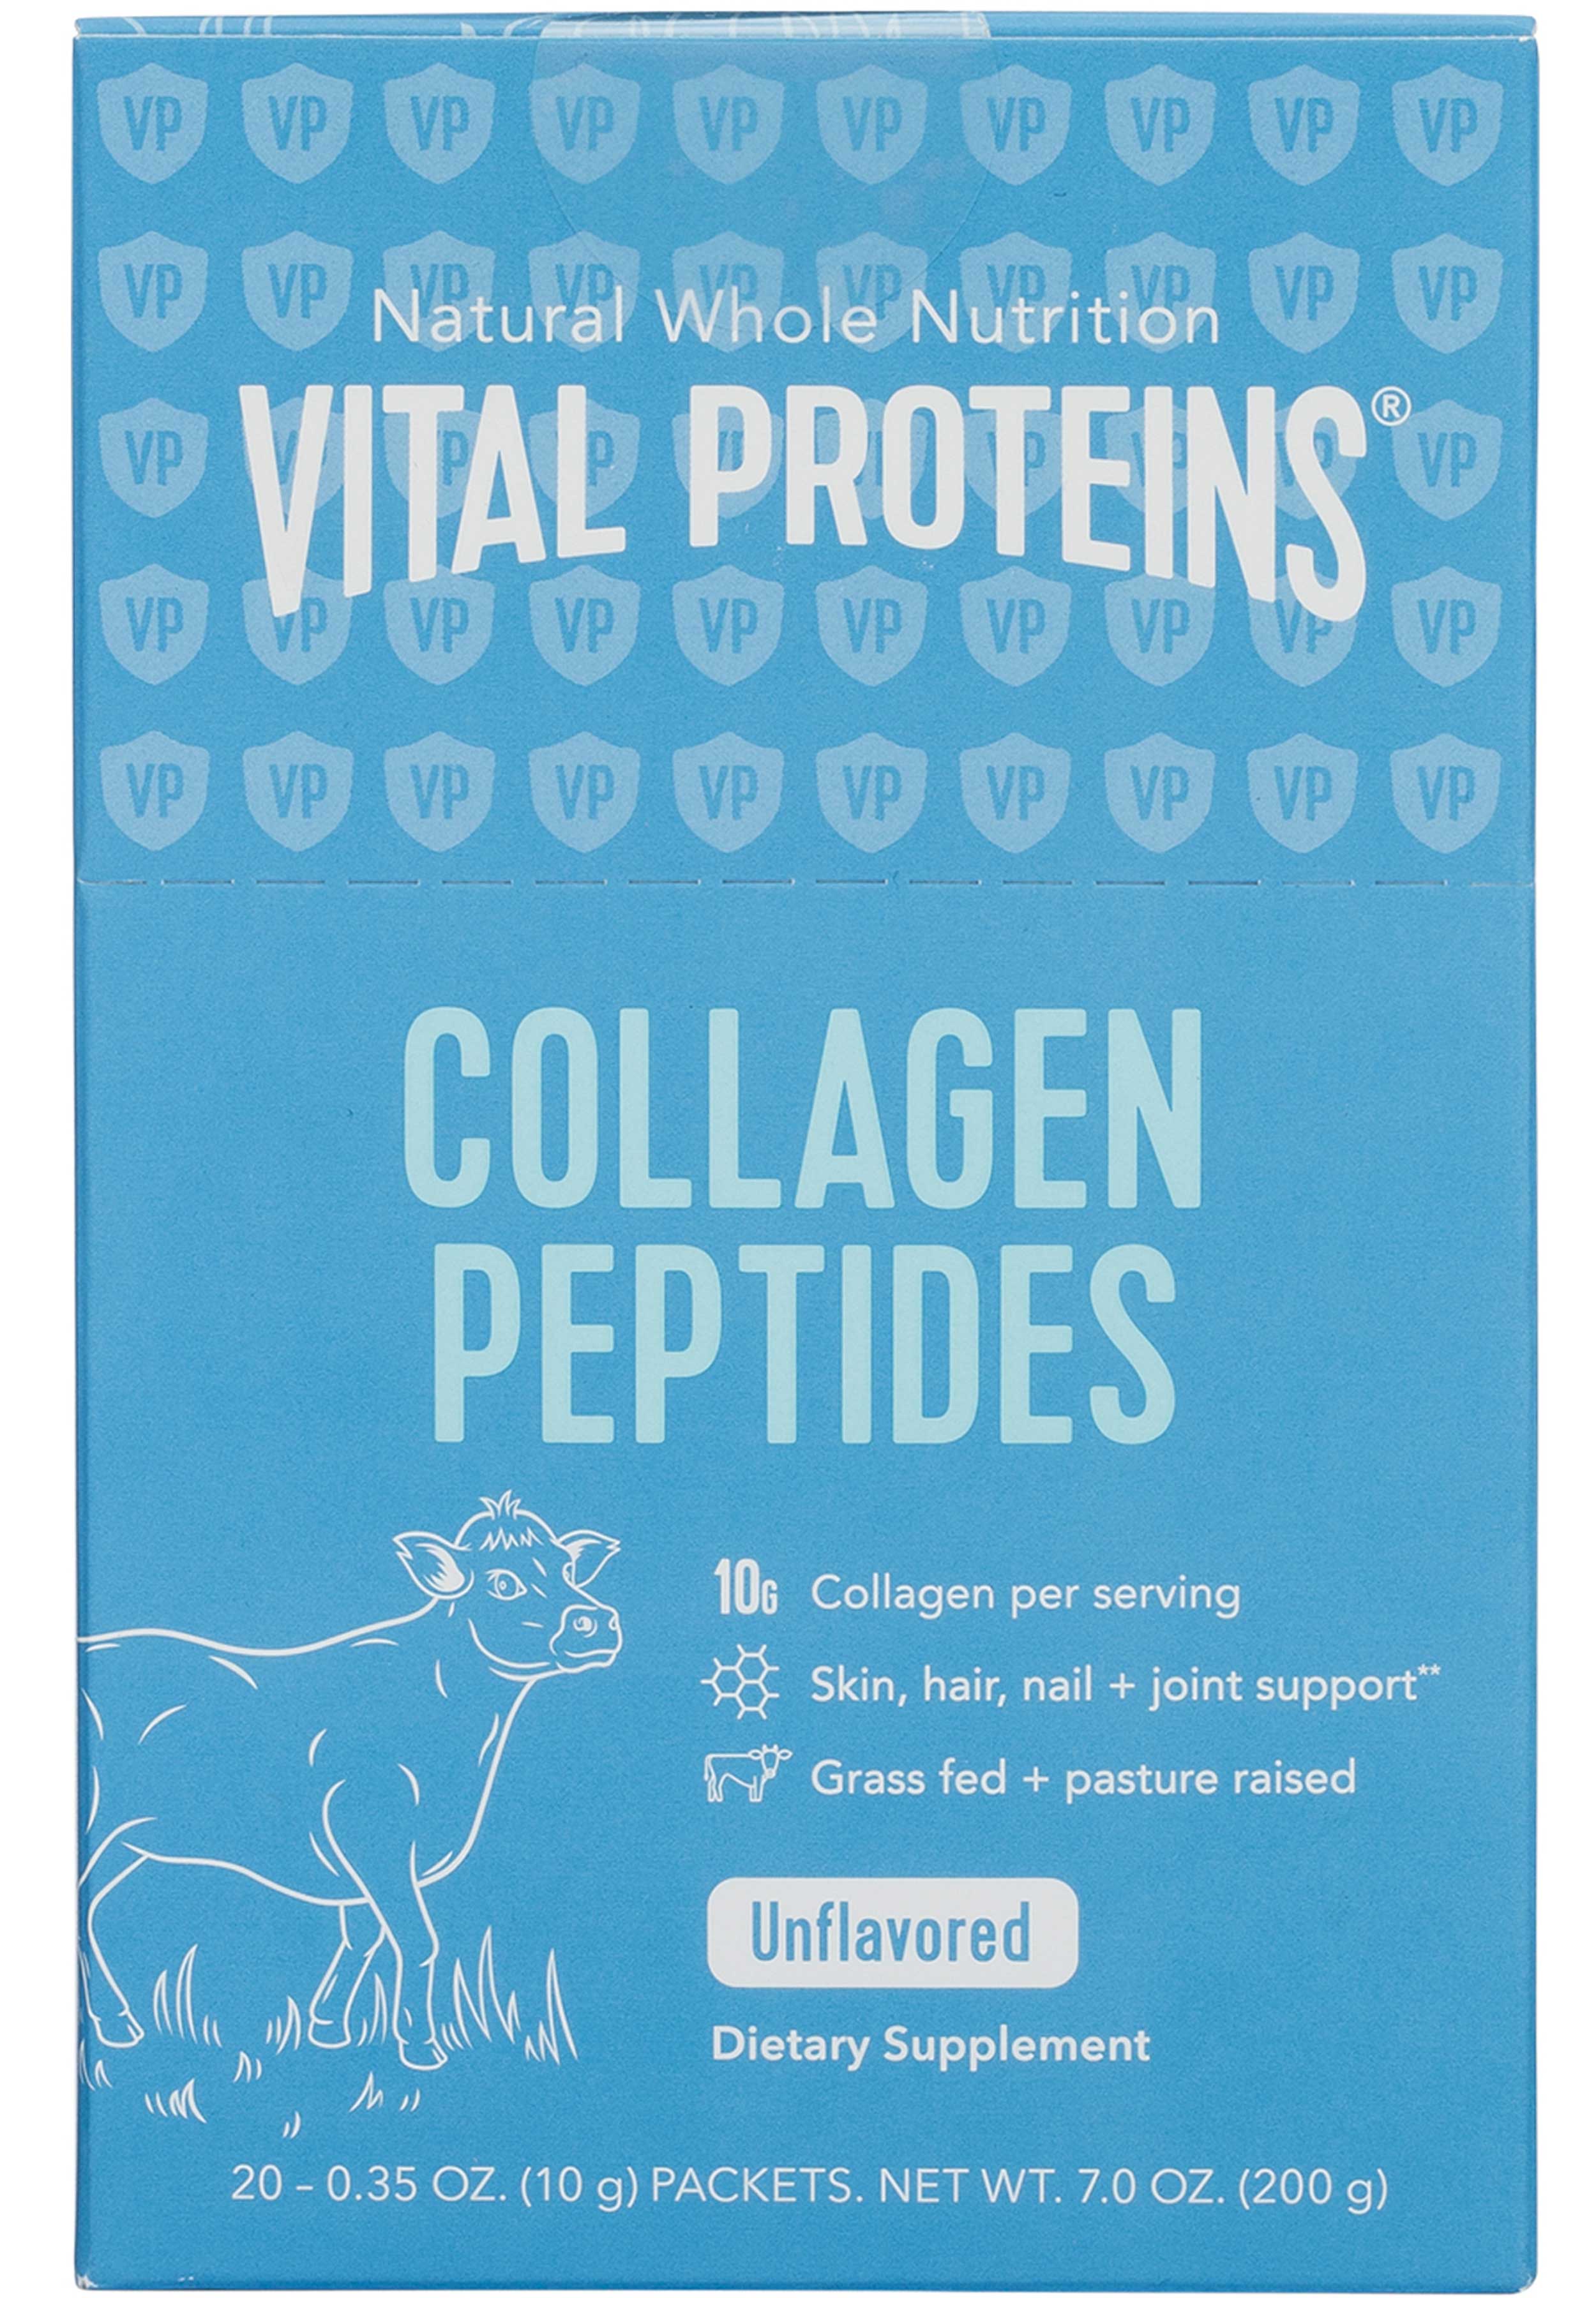 Vital Proteins Collagen Peptides Packets